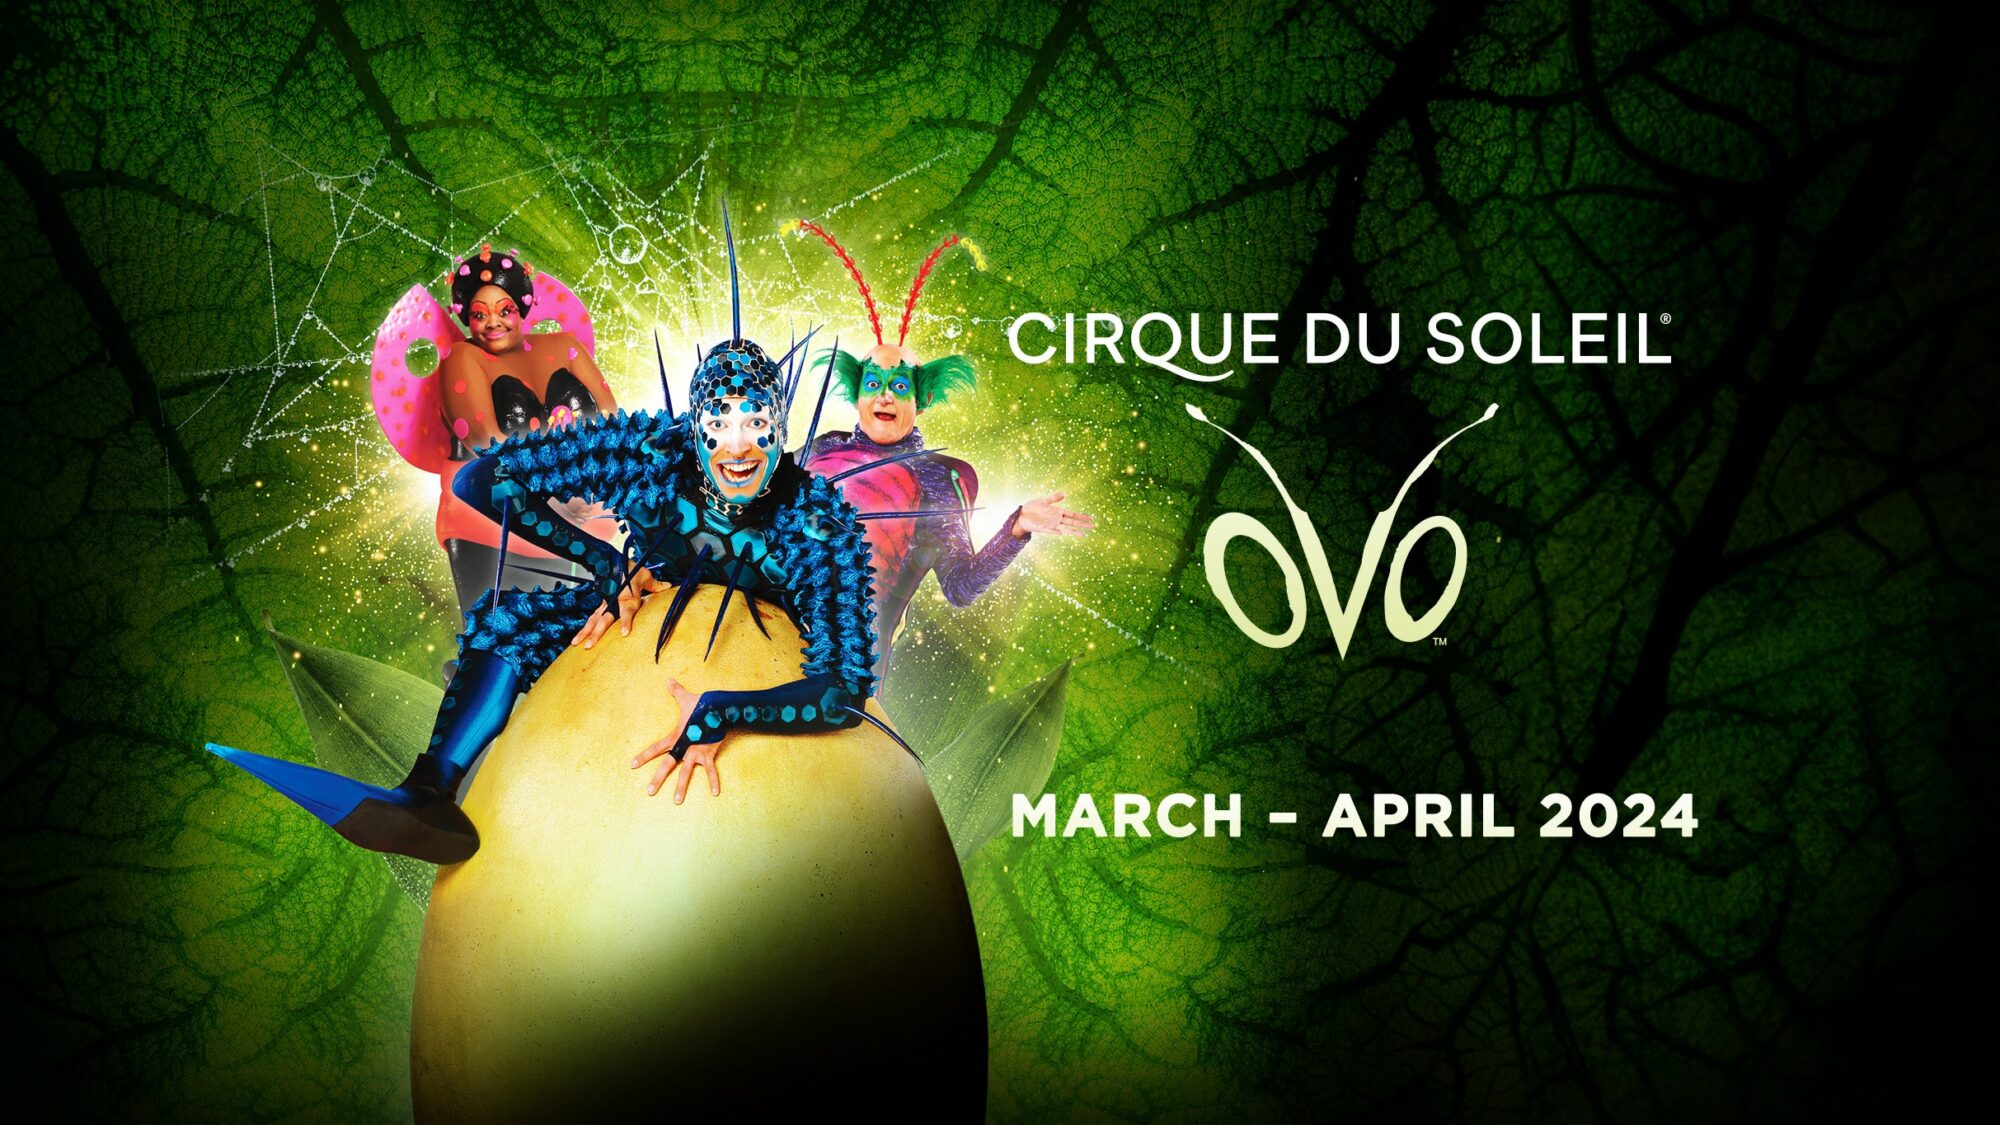 Image name Cirque Du Soleil Ovo at First Direct Arena Leeds the 1 image from the post Cirque du Soleil : OVO - Meet & Greet Upgrade at First Direct Arena, Leeds in Yorkshire.com.